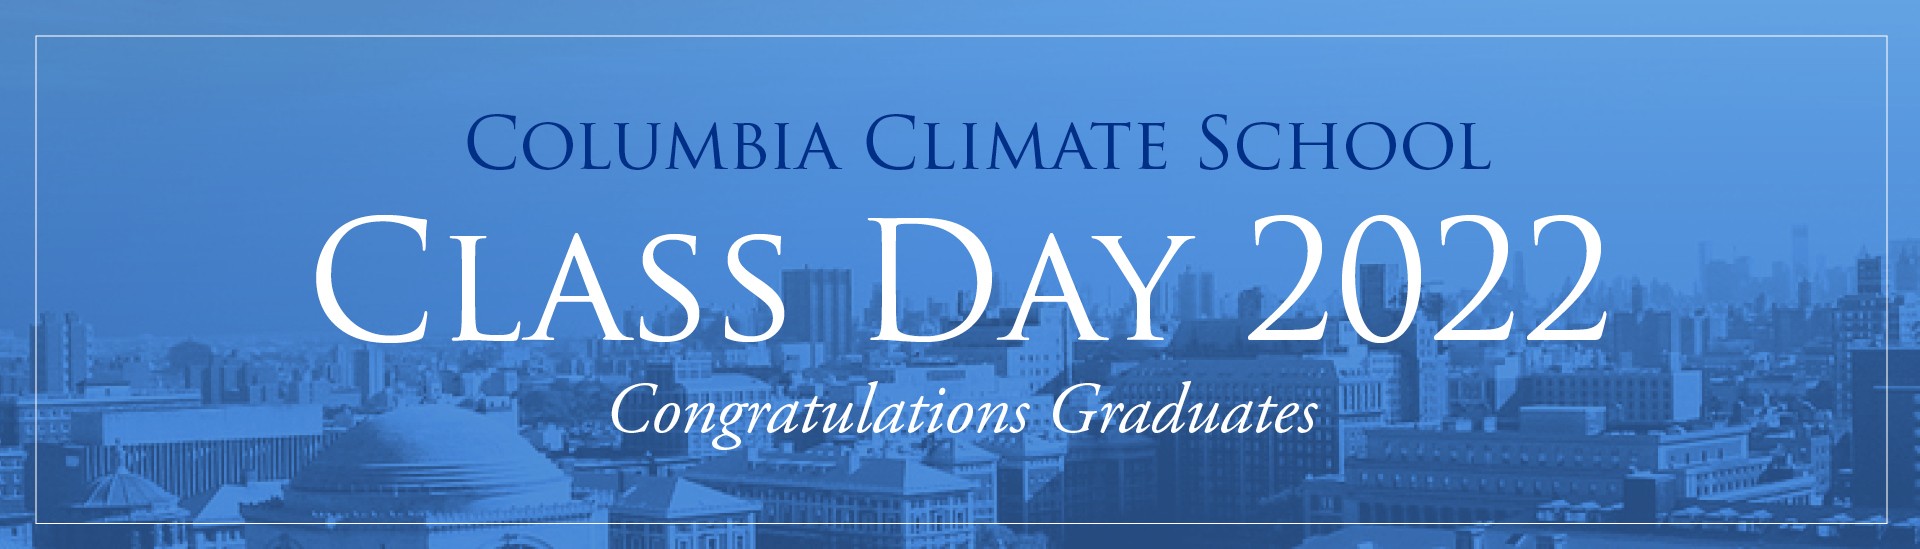 Columbia Climate School Class Day 2022